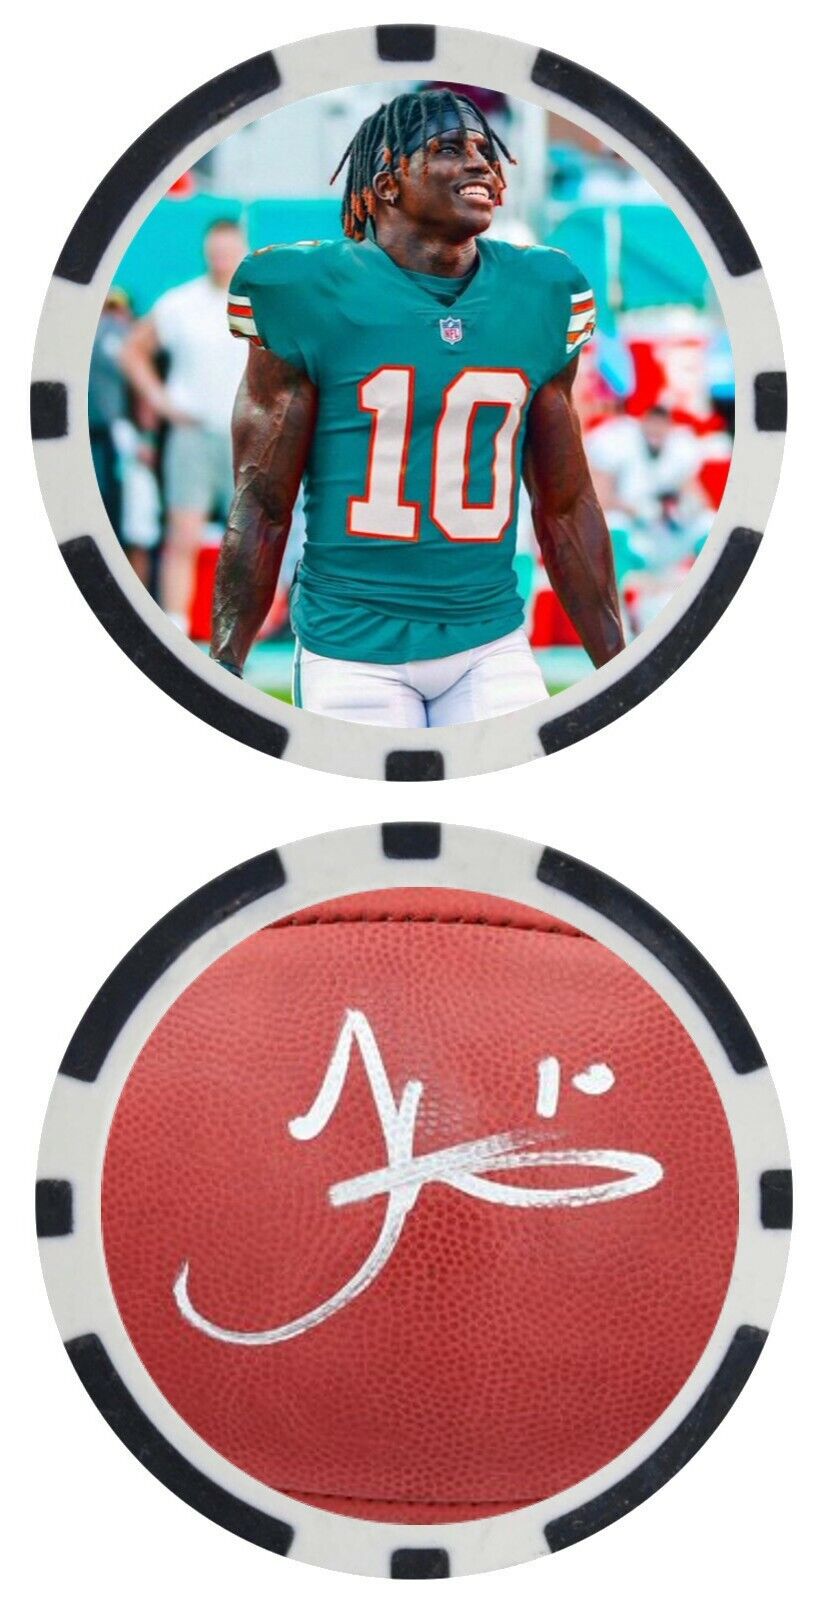 TYREEK HILL - MIAMI DOLPHINS - POKER CHIP -  ***SIGNED/AUTO***